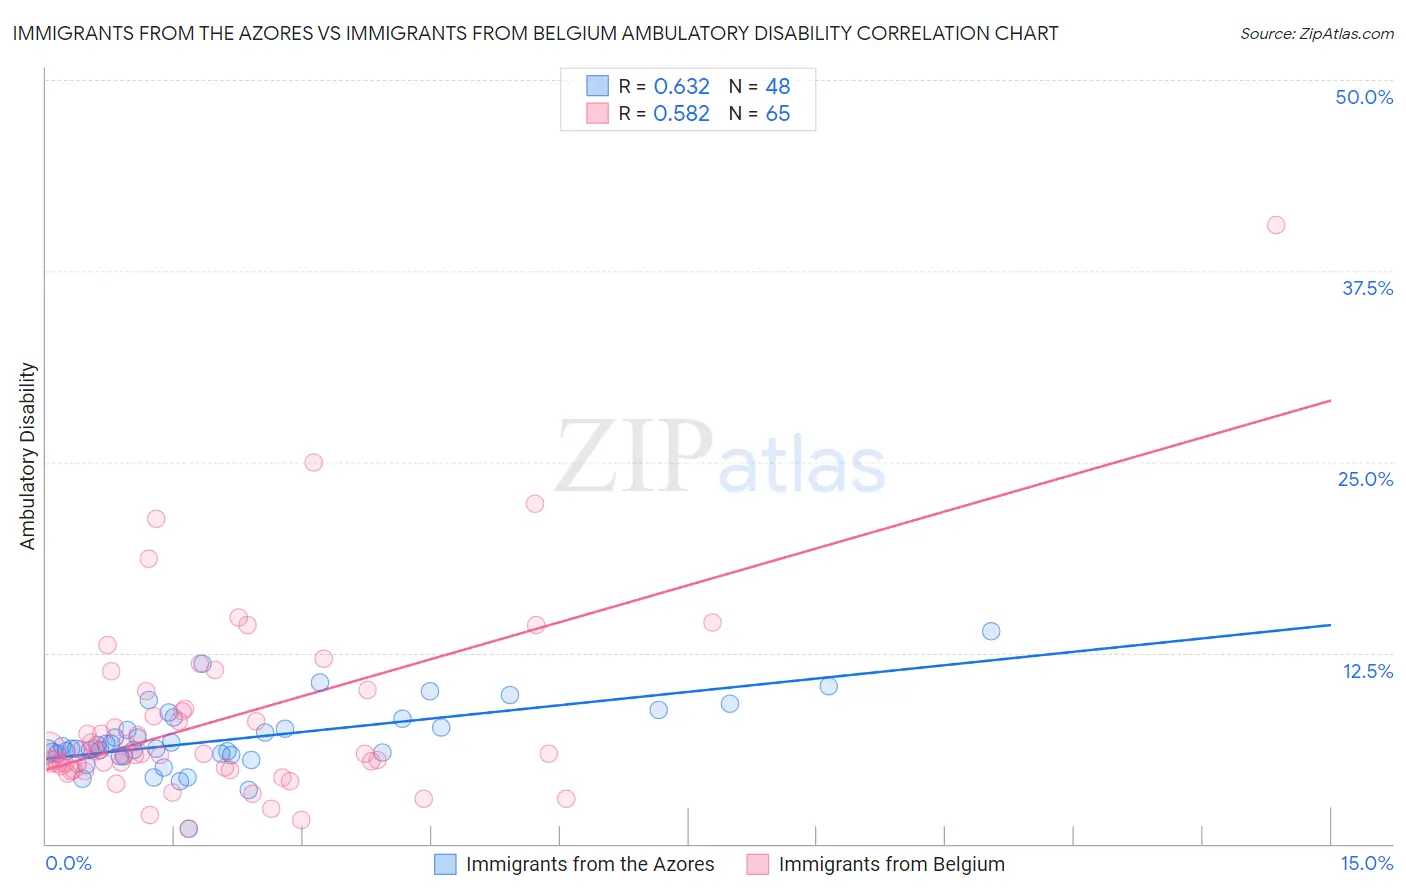 Immigrants from the Azores vs Immigrants from Belgium Ambulatory Disability